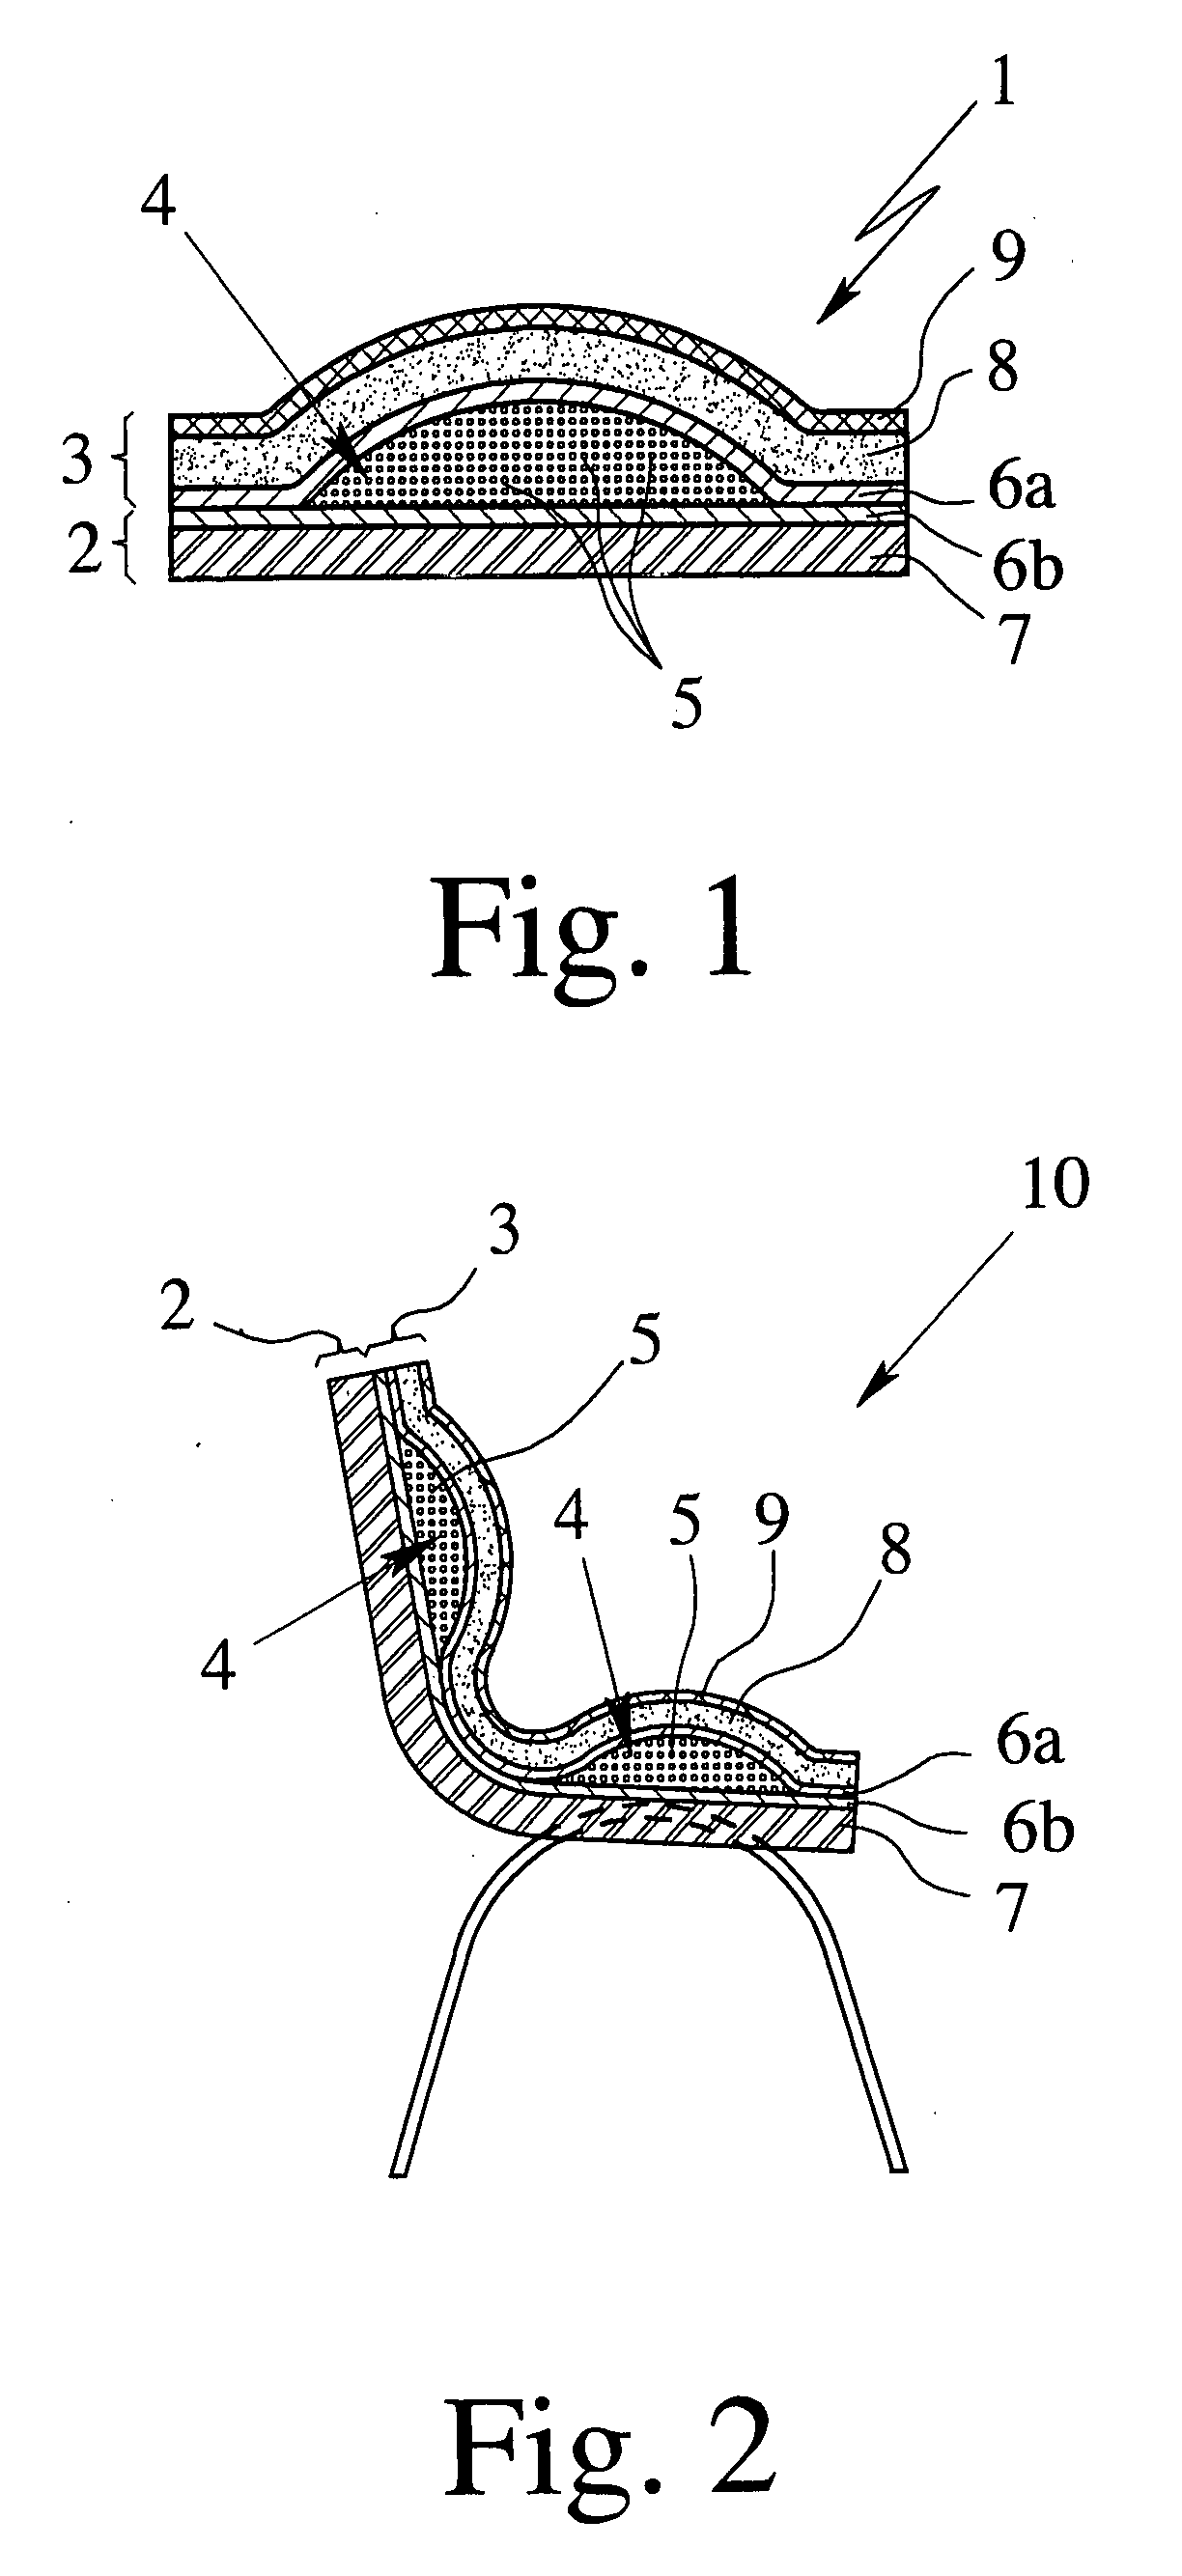 Three-dimensional cavity-formed part having a multilayered structure and process of its manufacture